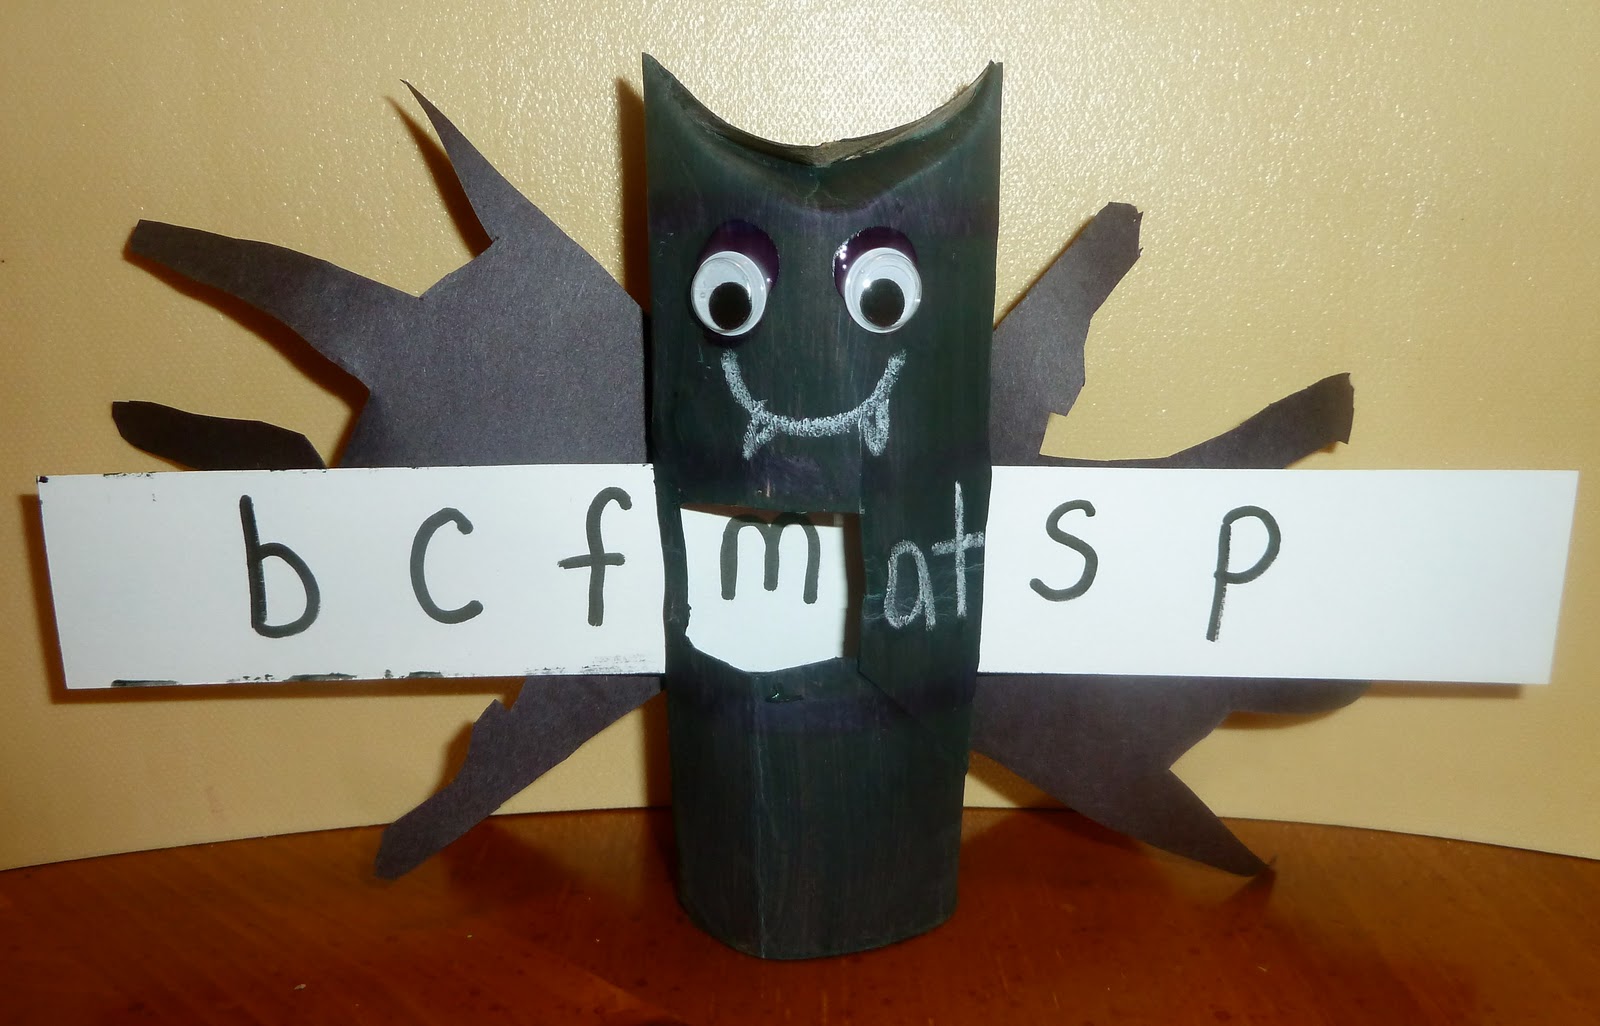 _at Words and Bat Craft Lesson Plans